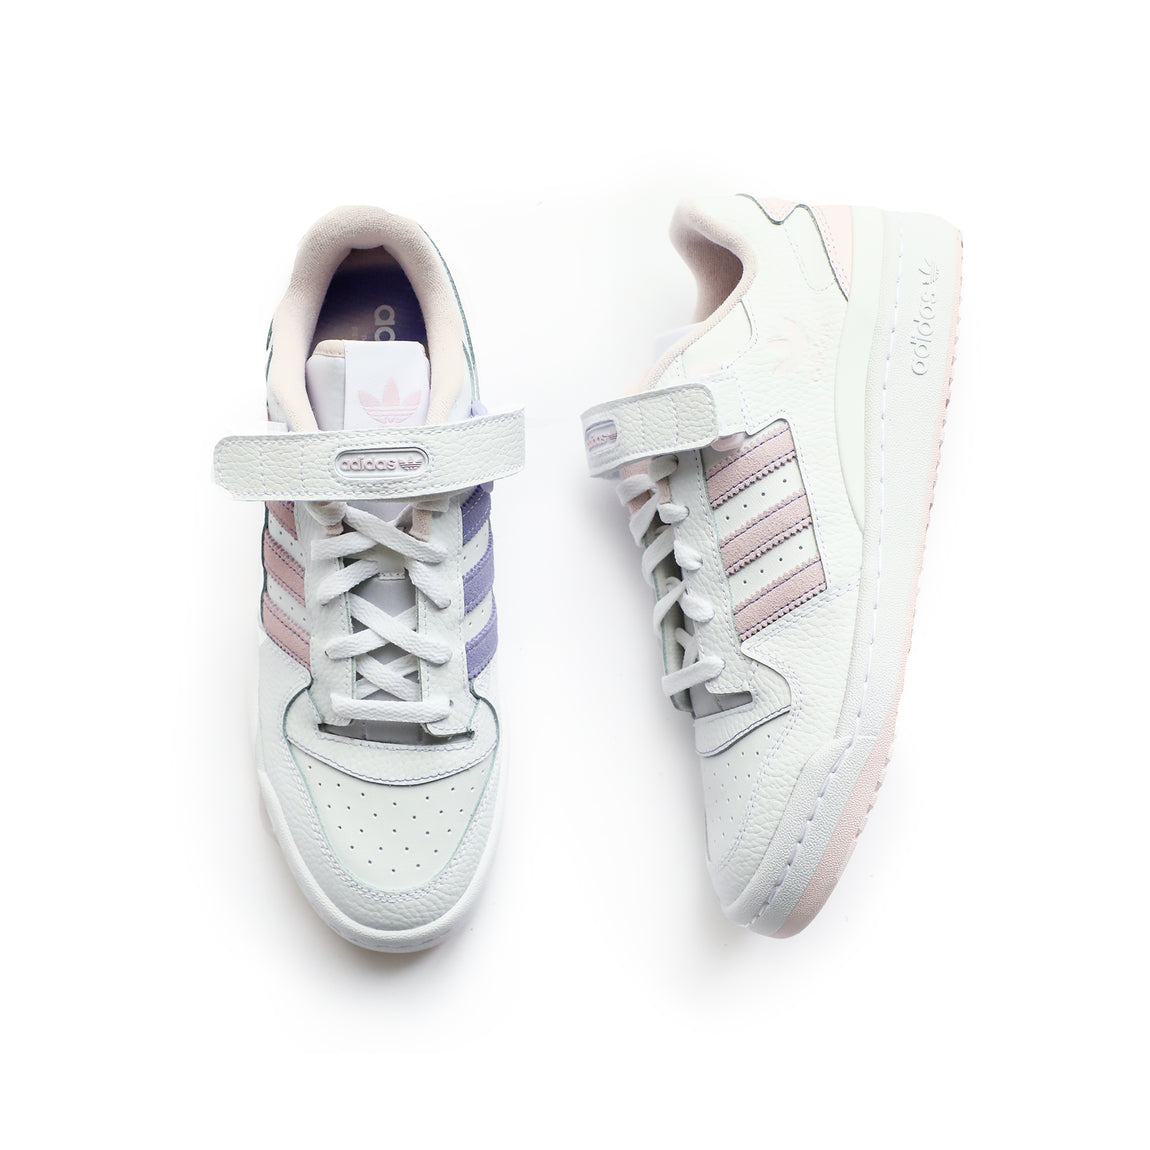 Adidas Forum Low (White/Almost Pink/Light Purple) - Adidas Forum Low (White/Almost Pink/Light Purple) - 